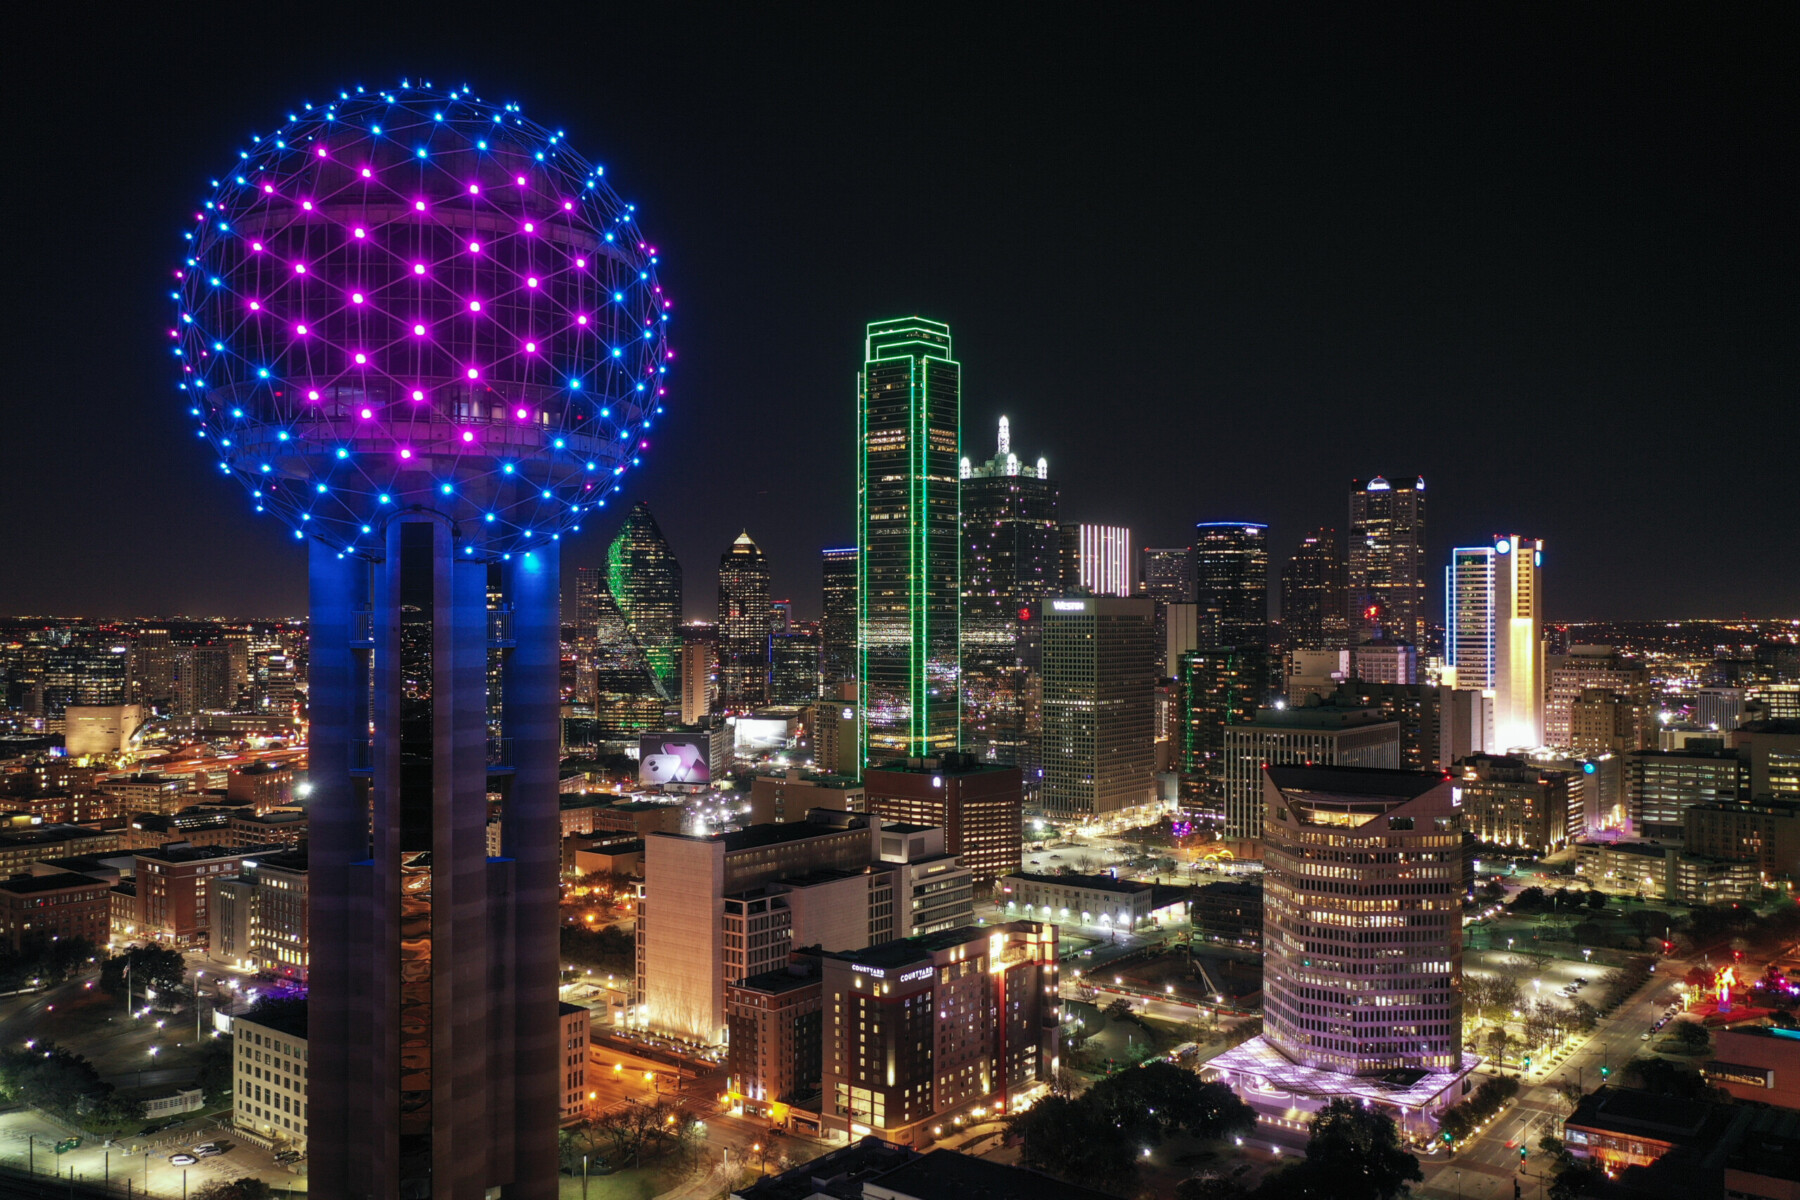 When Reunion Tower's Last Restaurant Revolved, It Caused a Gruesome Accident - D Magazine